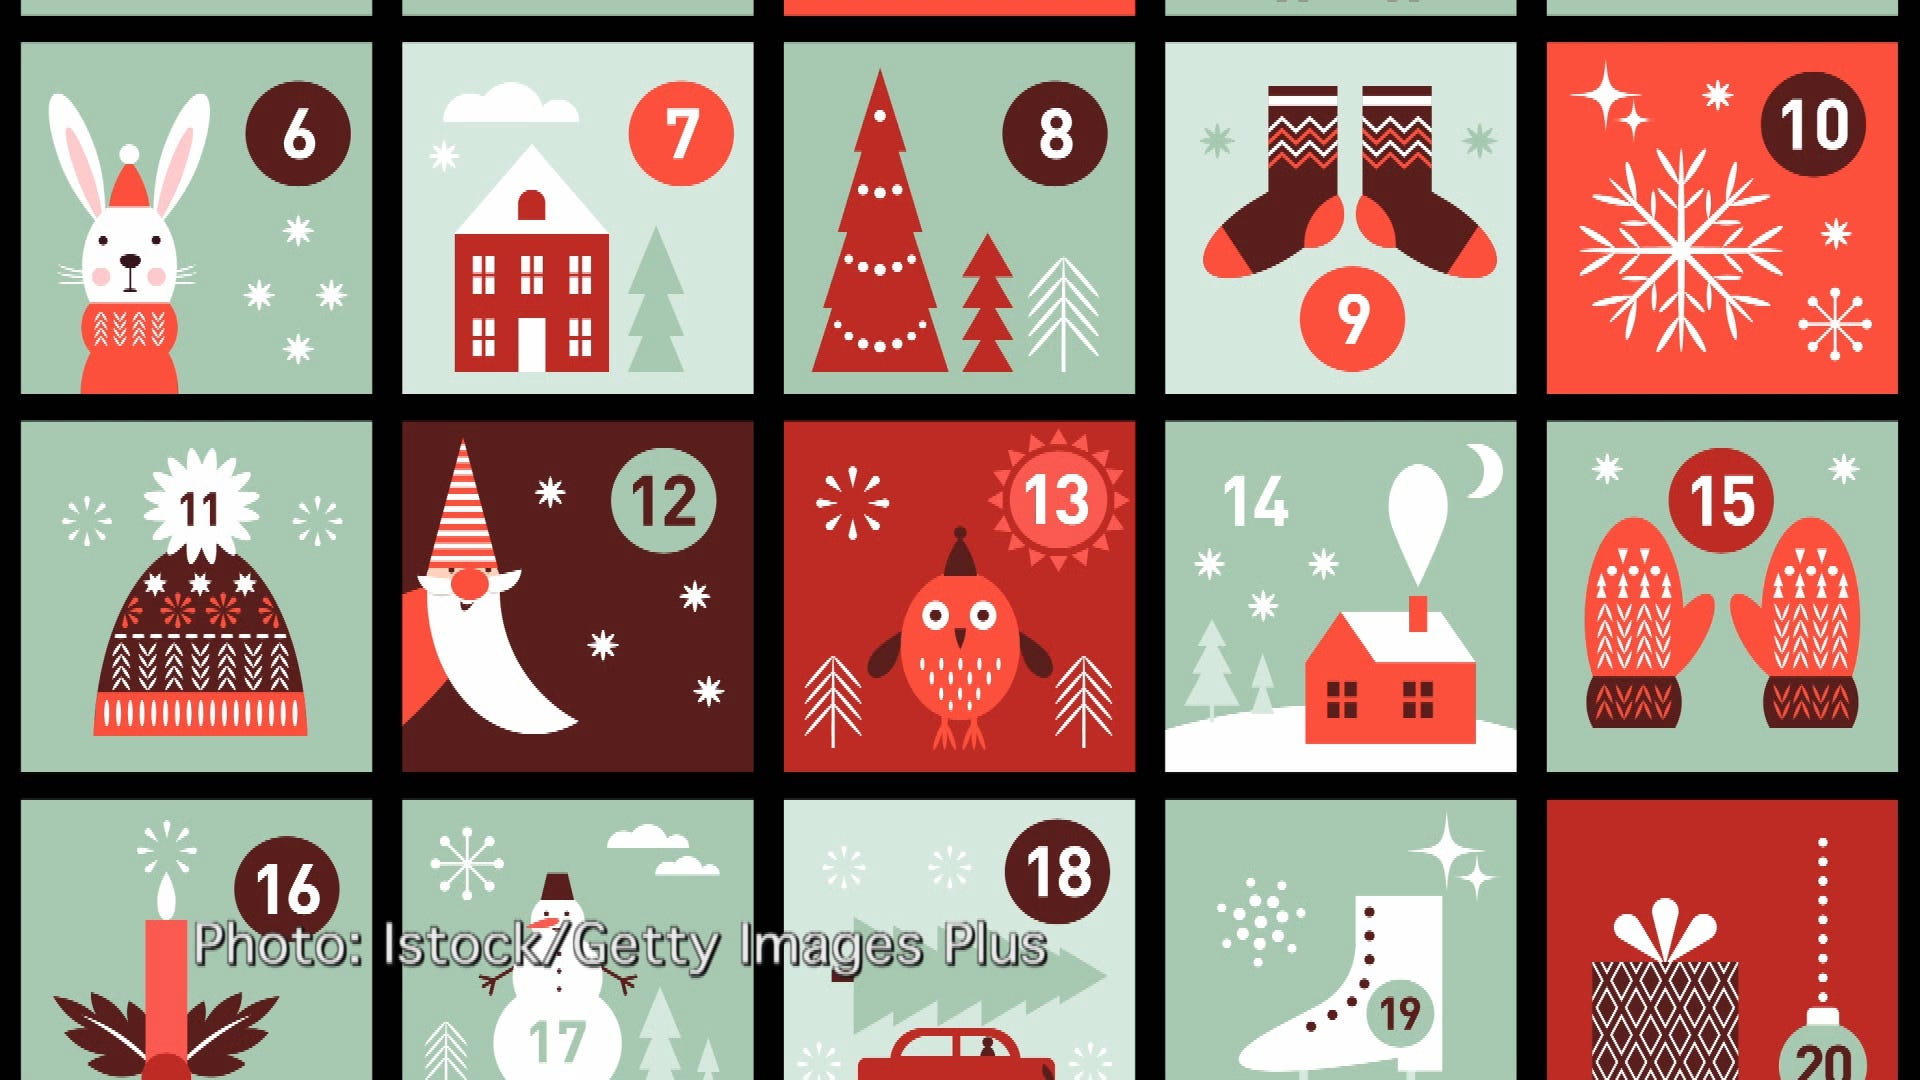 Easy, fun ways to make your own advent calendar